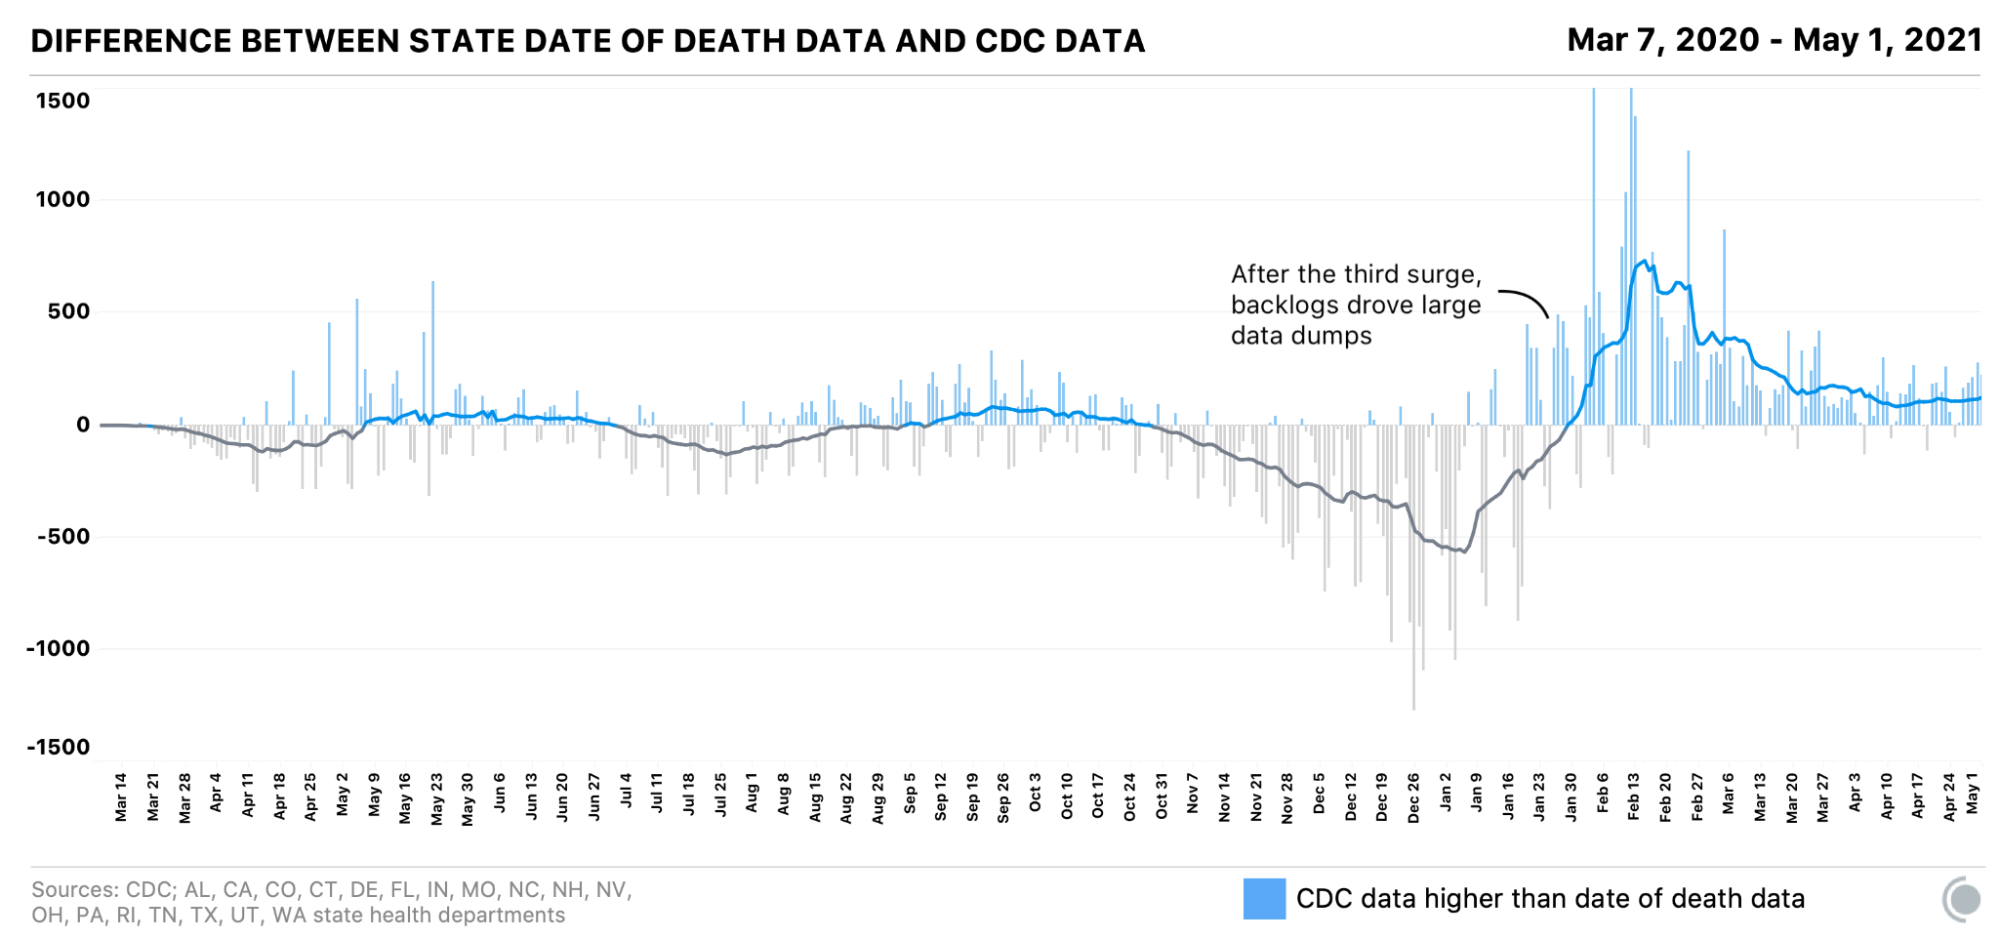 A graph shows differences between CDC and state date-of-death data. After the third surge, data dumps led to CDC data overcounting state data by more than prior surges.